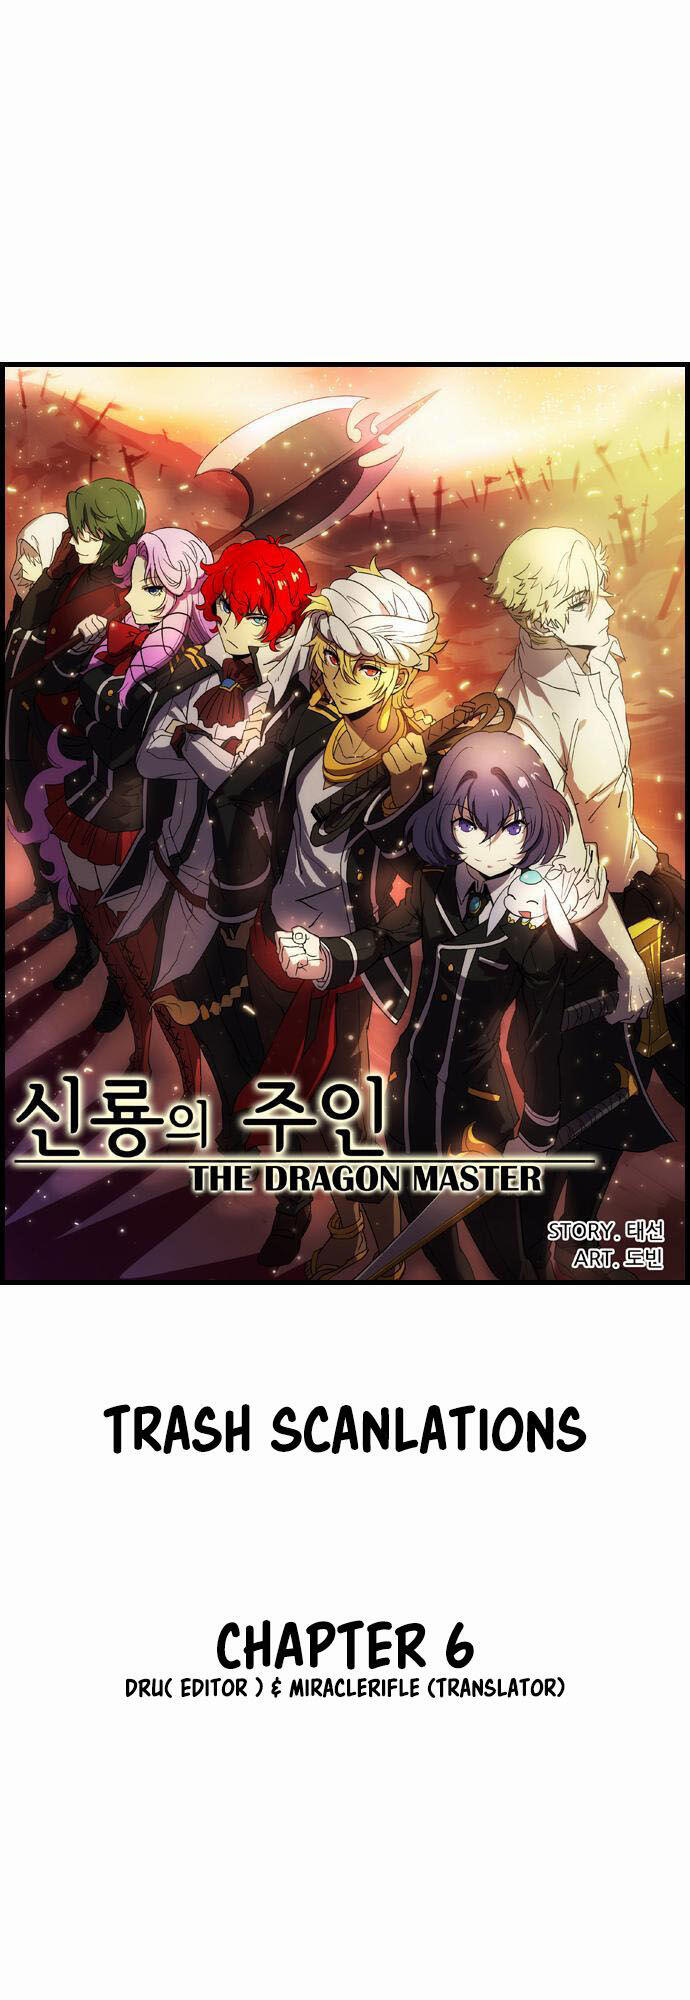 The Dragon Master Chapter 6